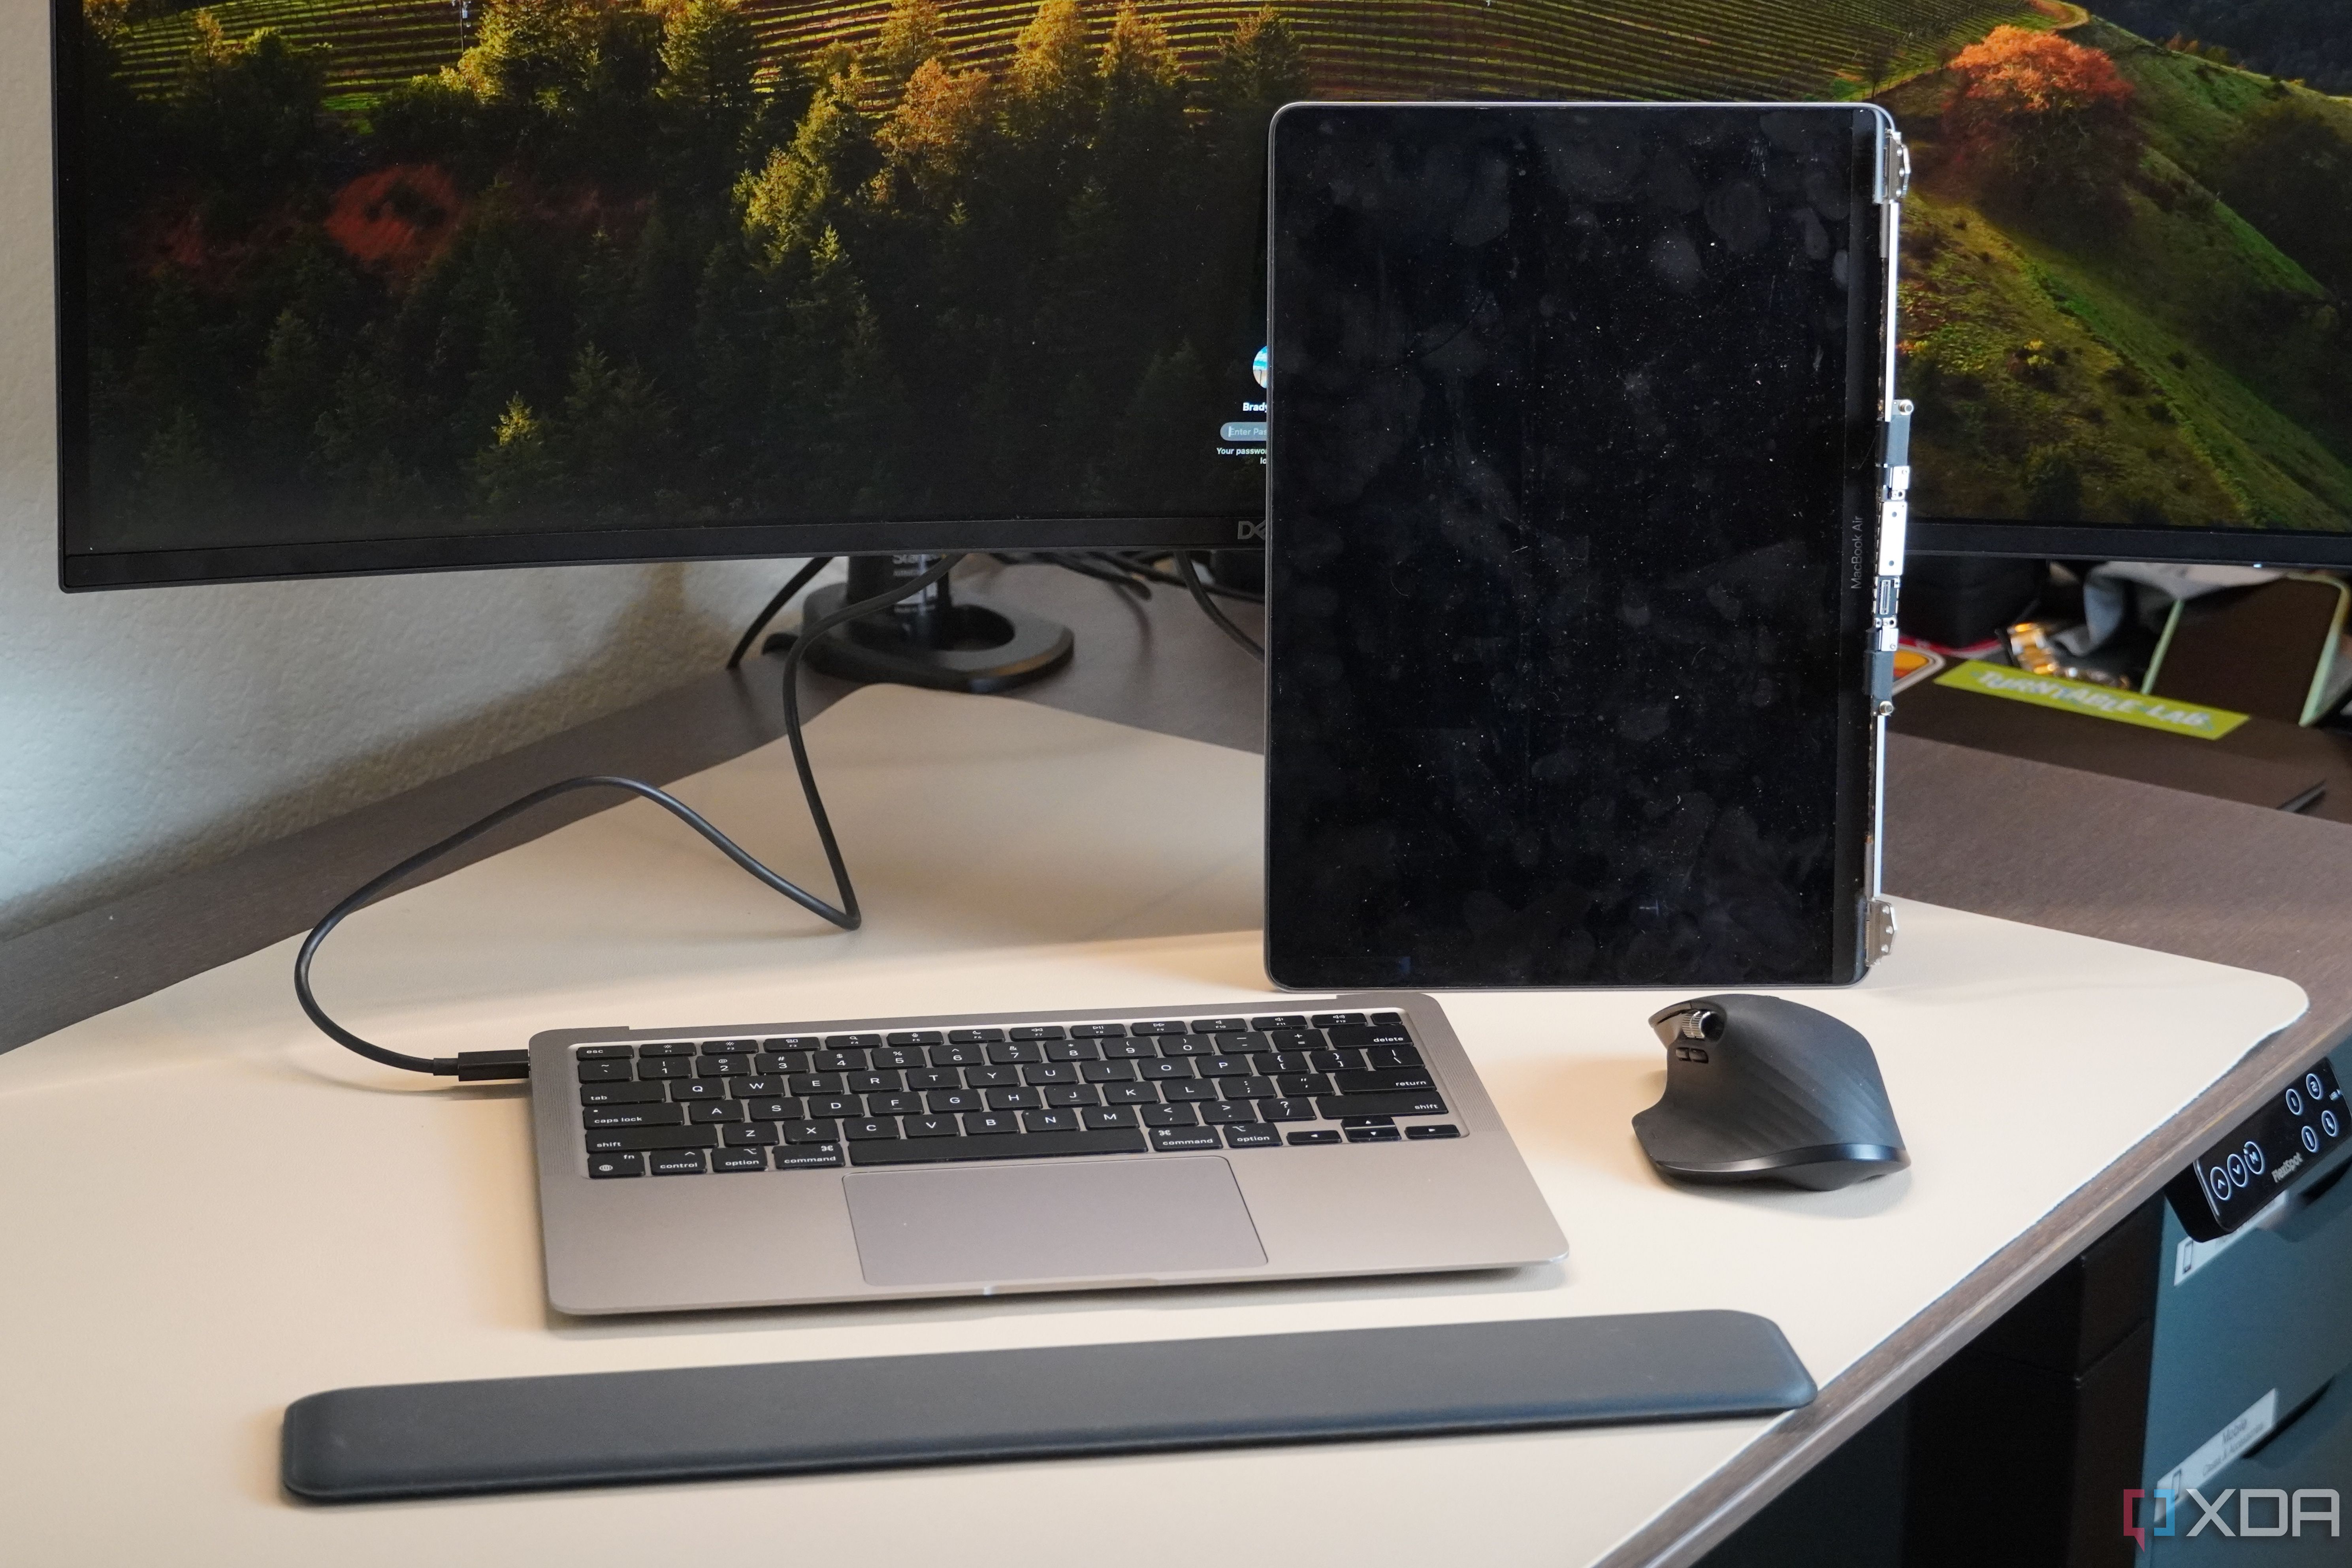 I turned a broken MacBook into a killer desktop workstation by ripping off the screen